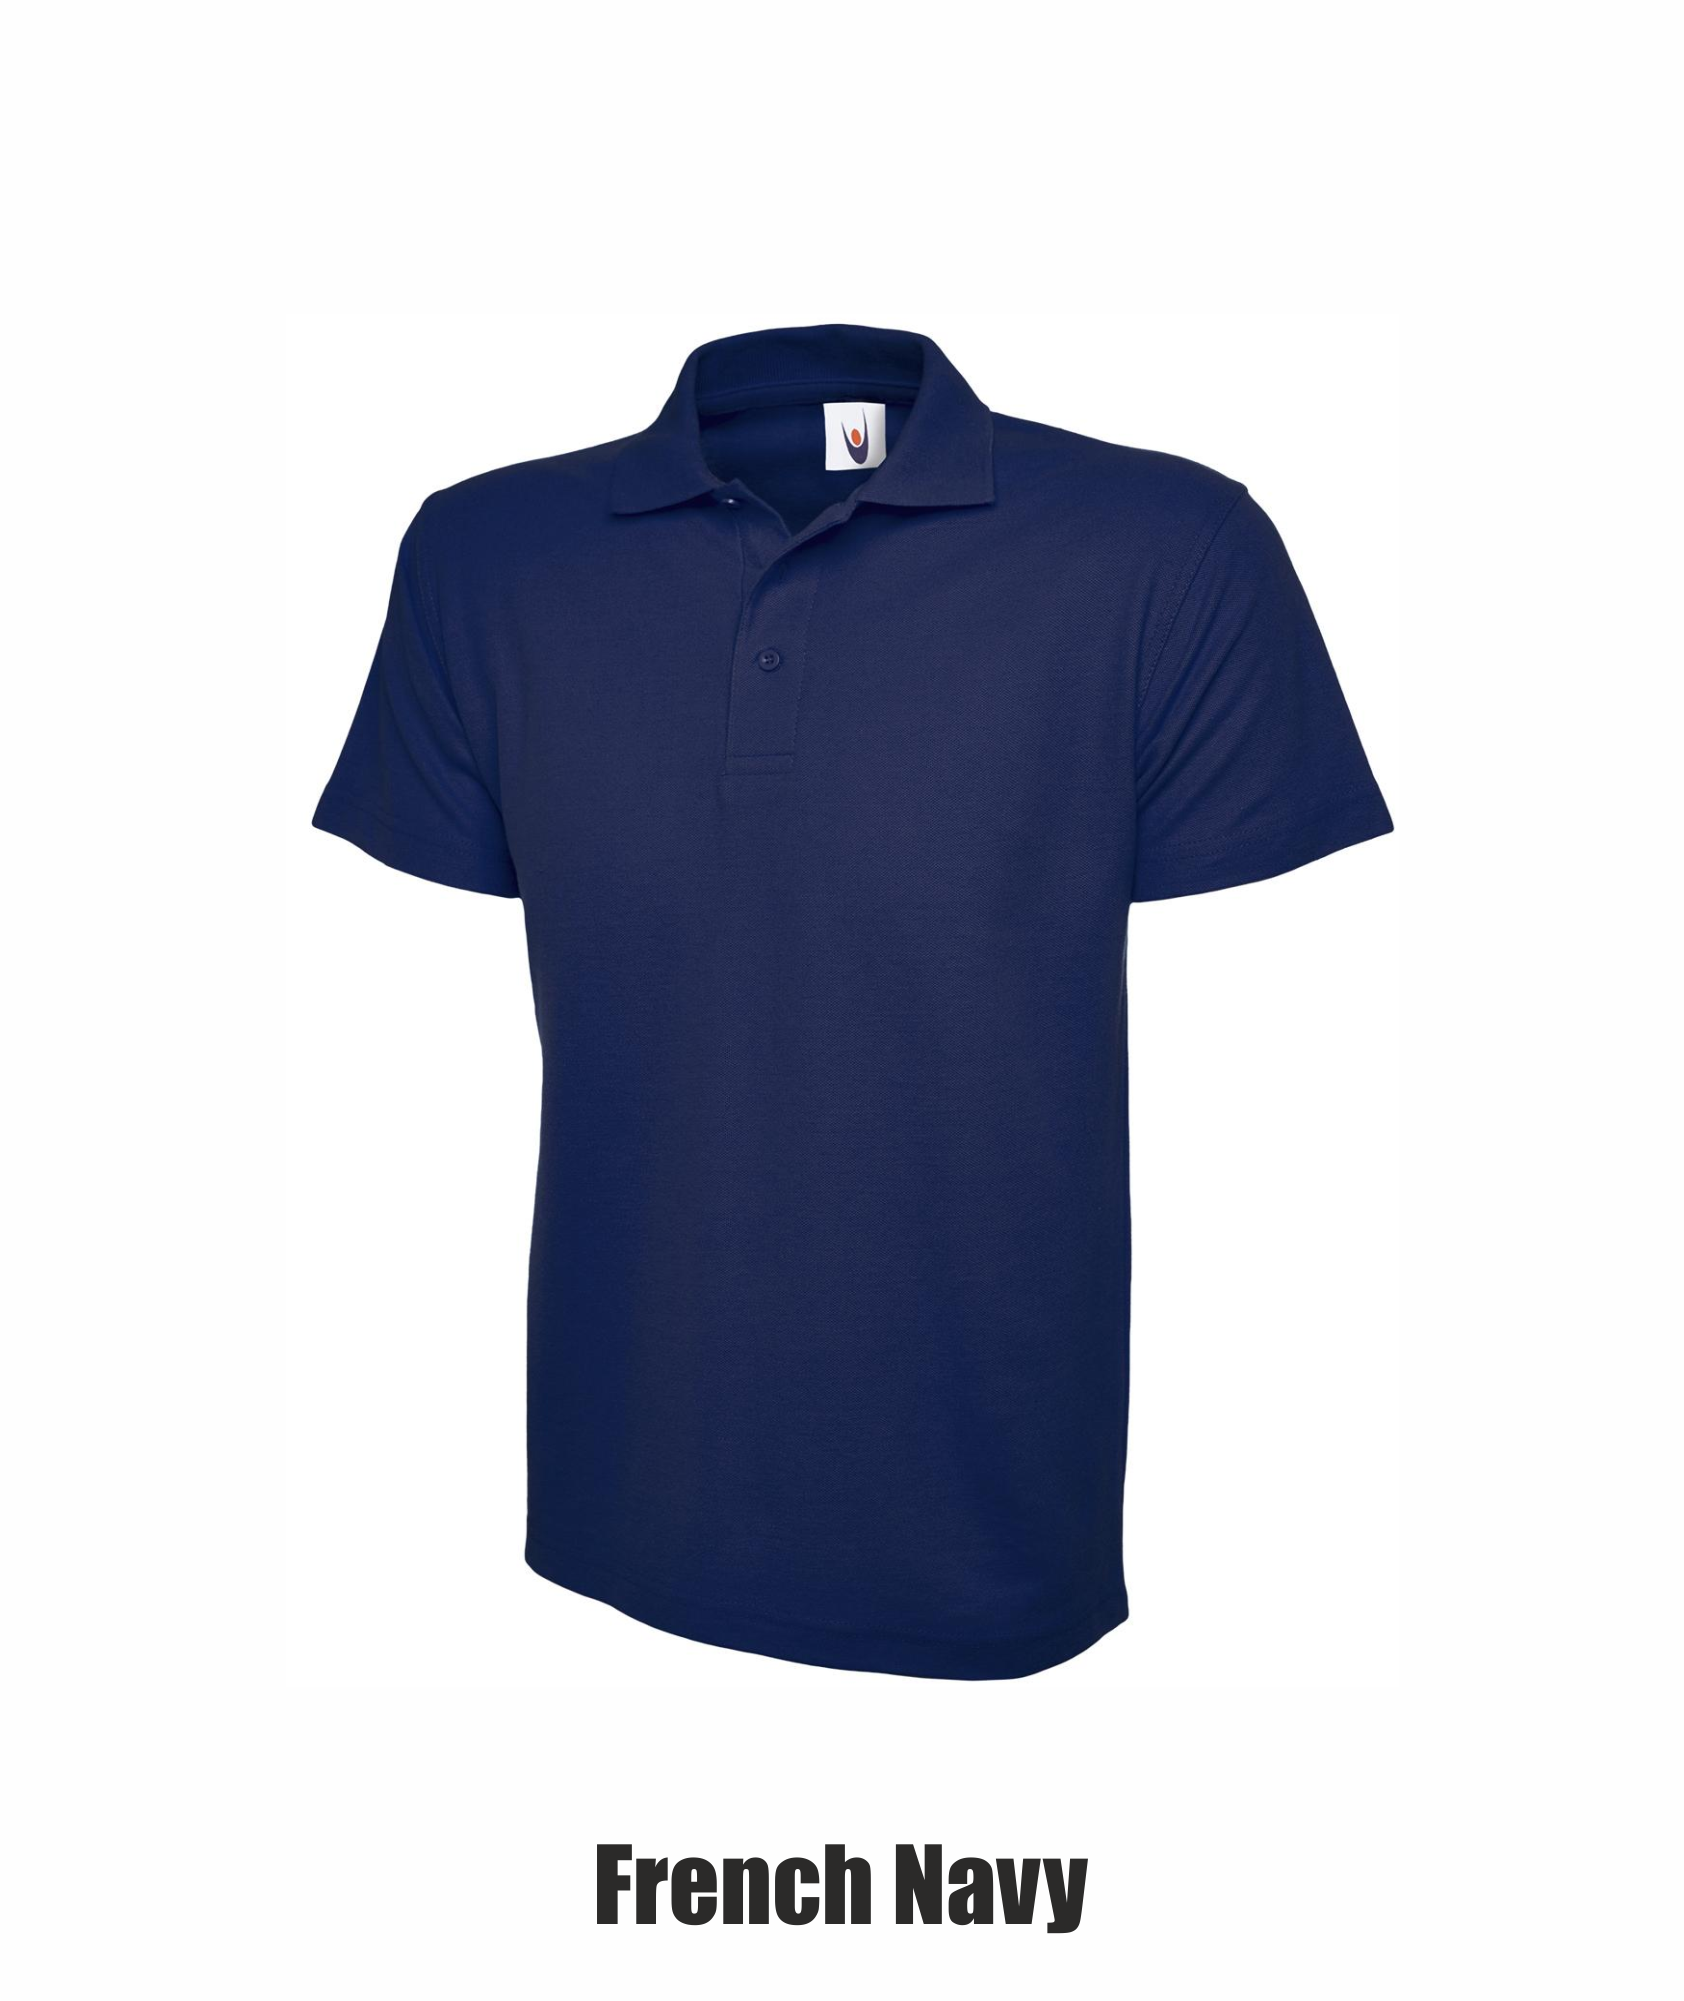 navy blue polo shirt front